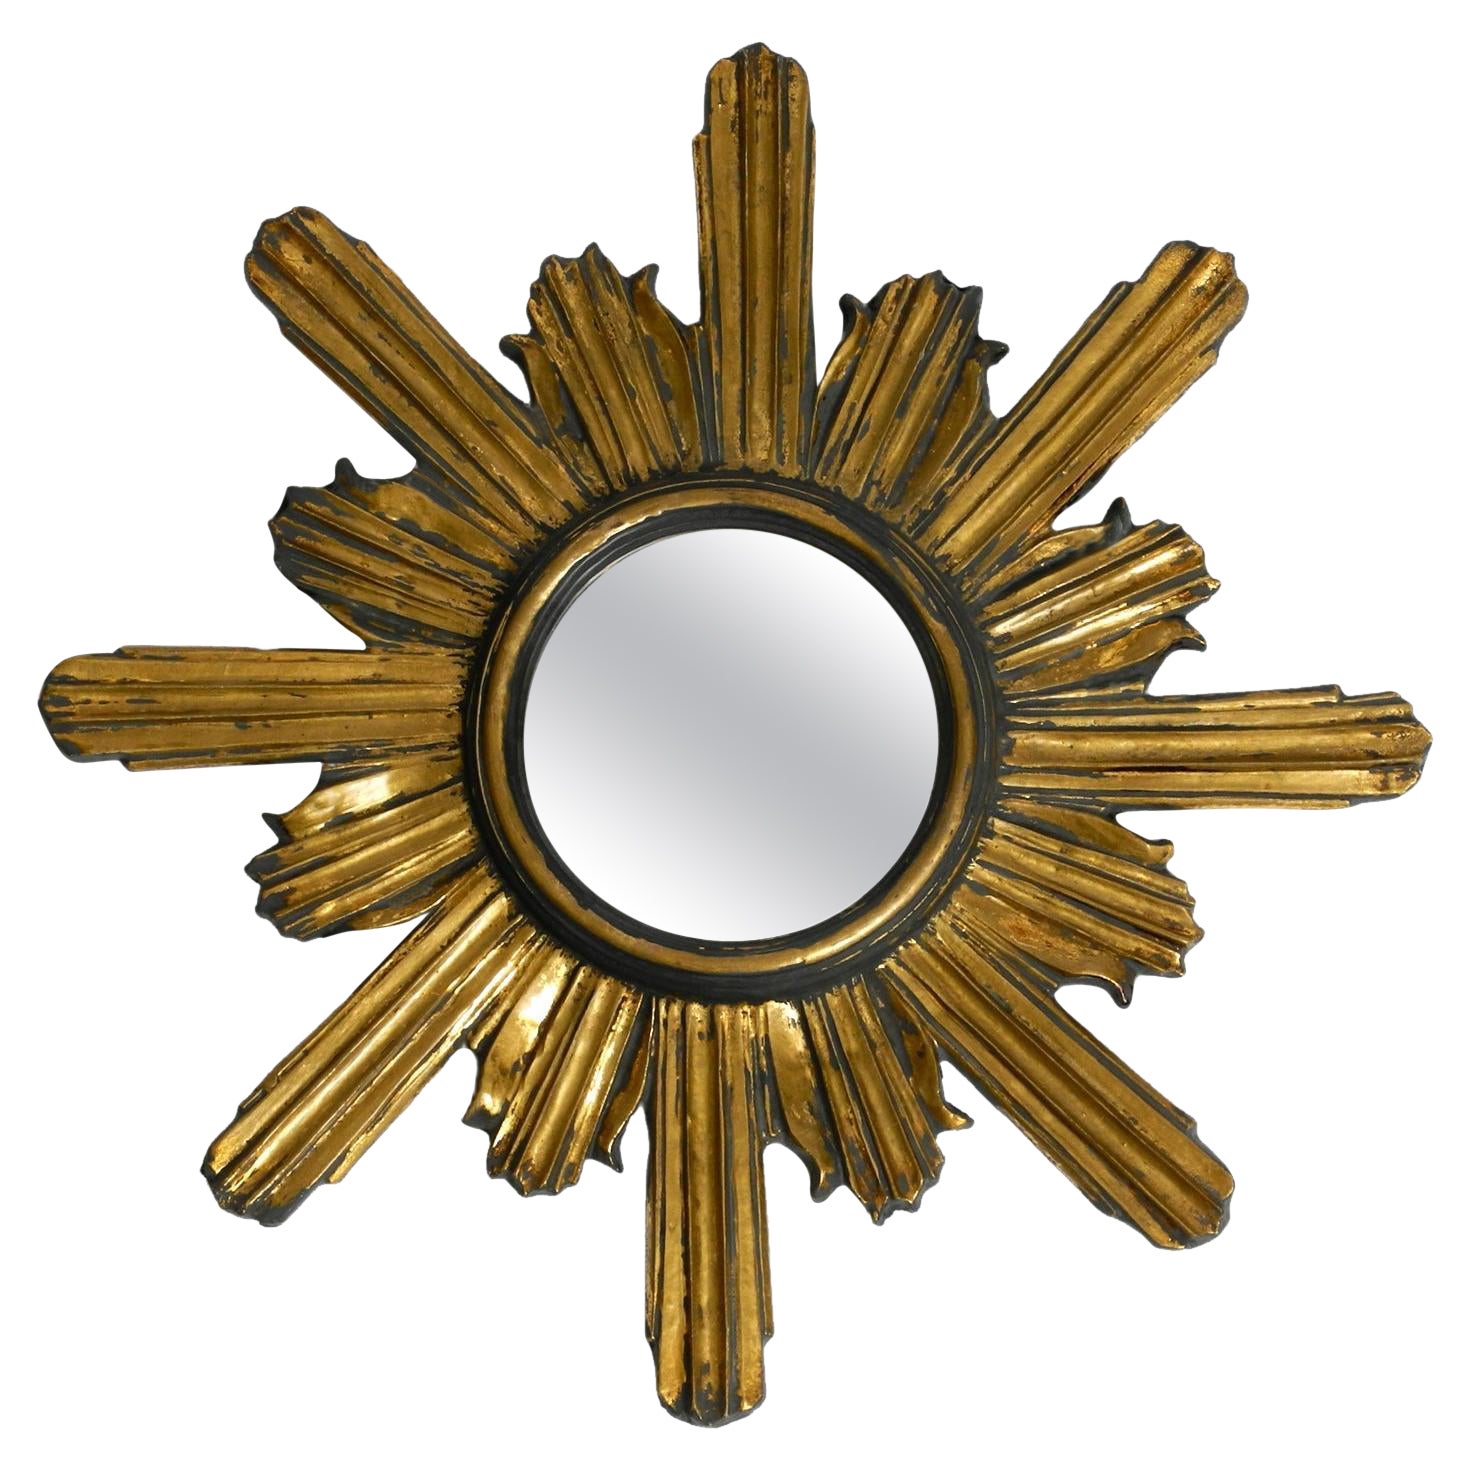 Large 50s Sunburst Wall Mirror Made of Wood and Resin, Gilded and in Grey Color